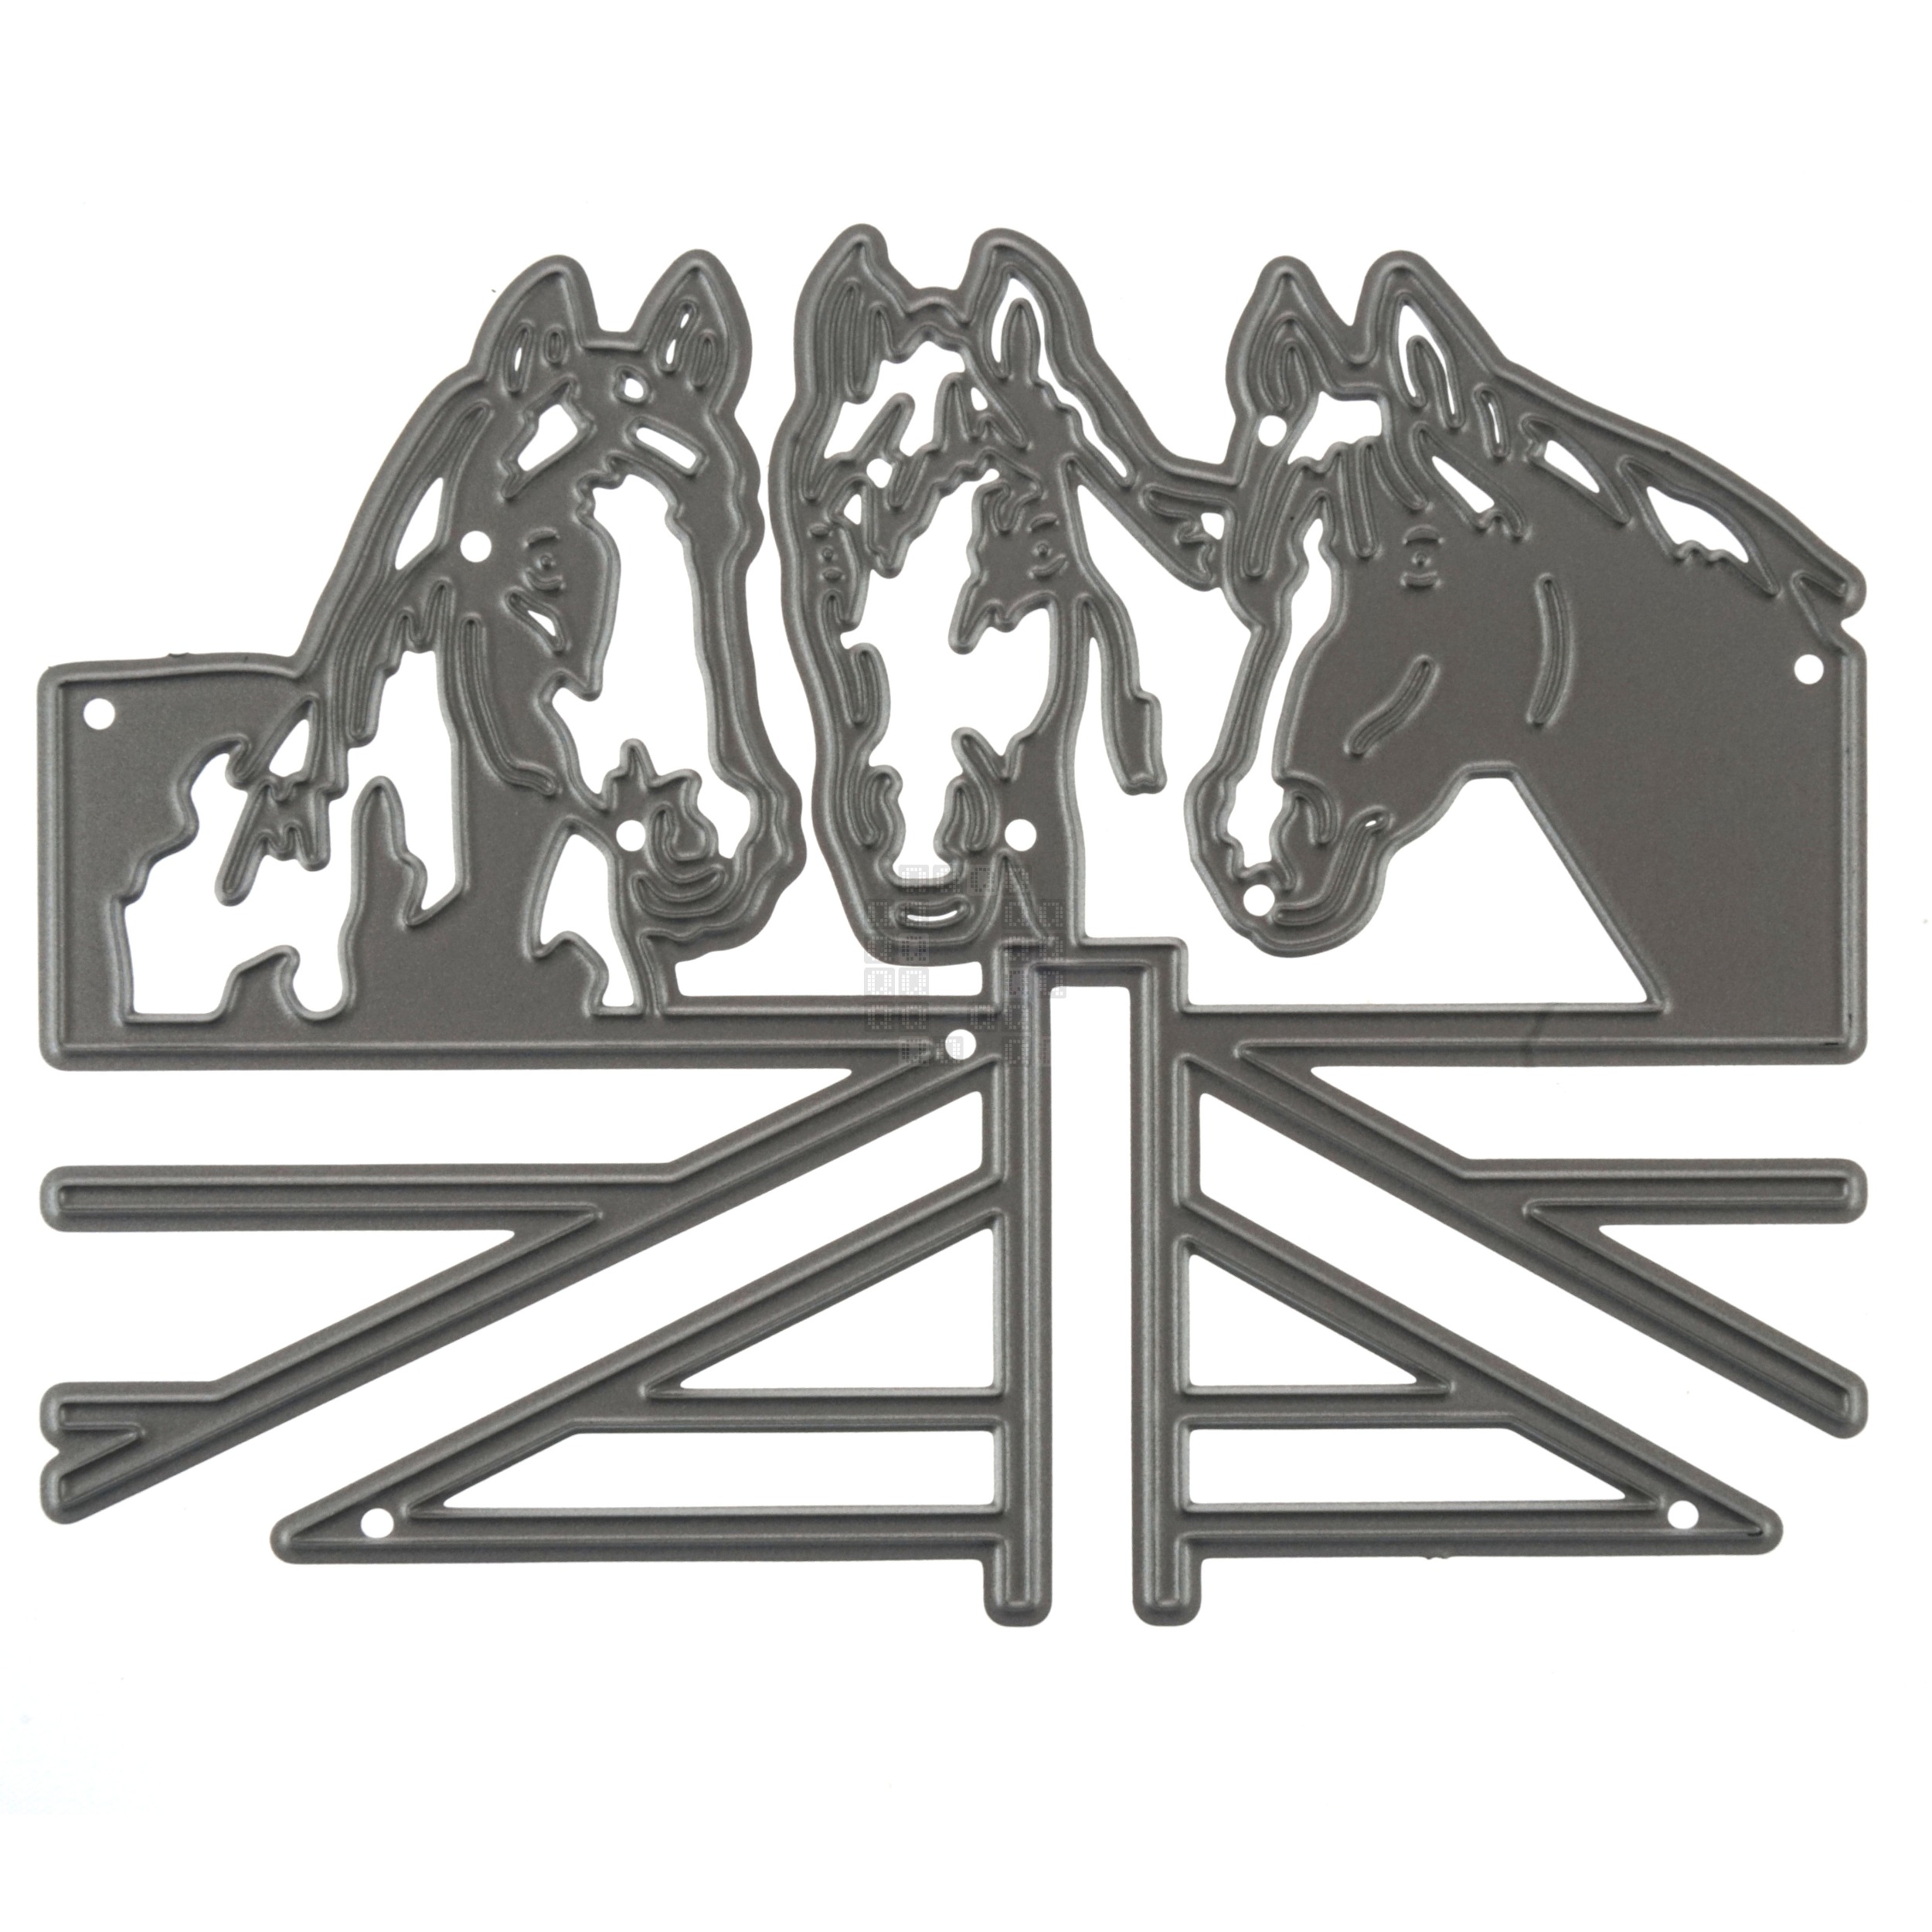 3 Horses Waiting at Wooden Gate Metal Cutting Die